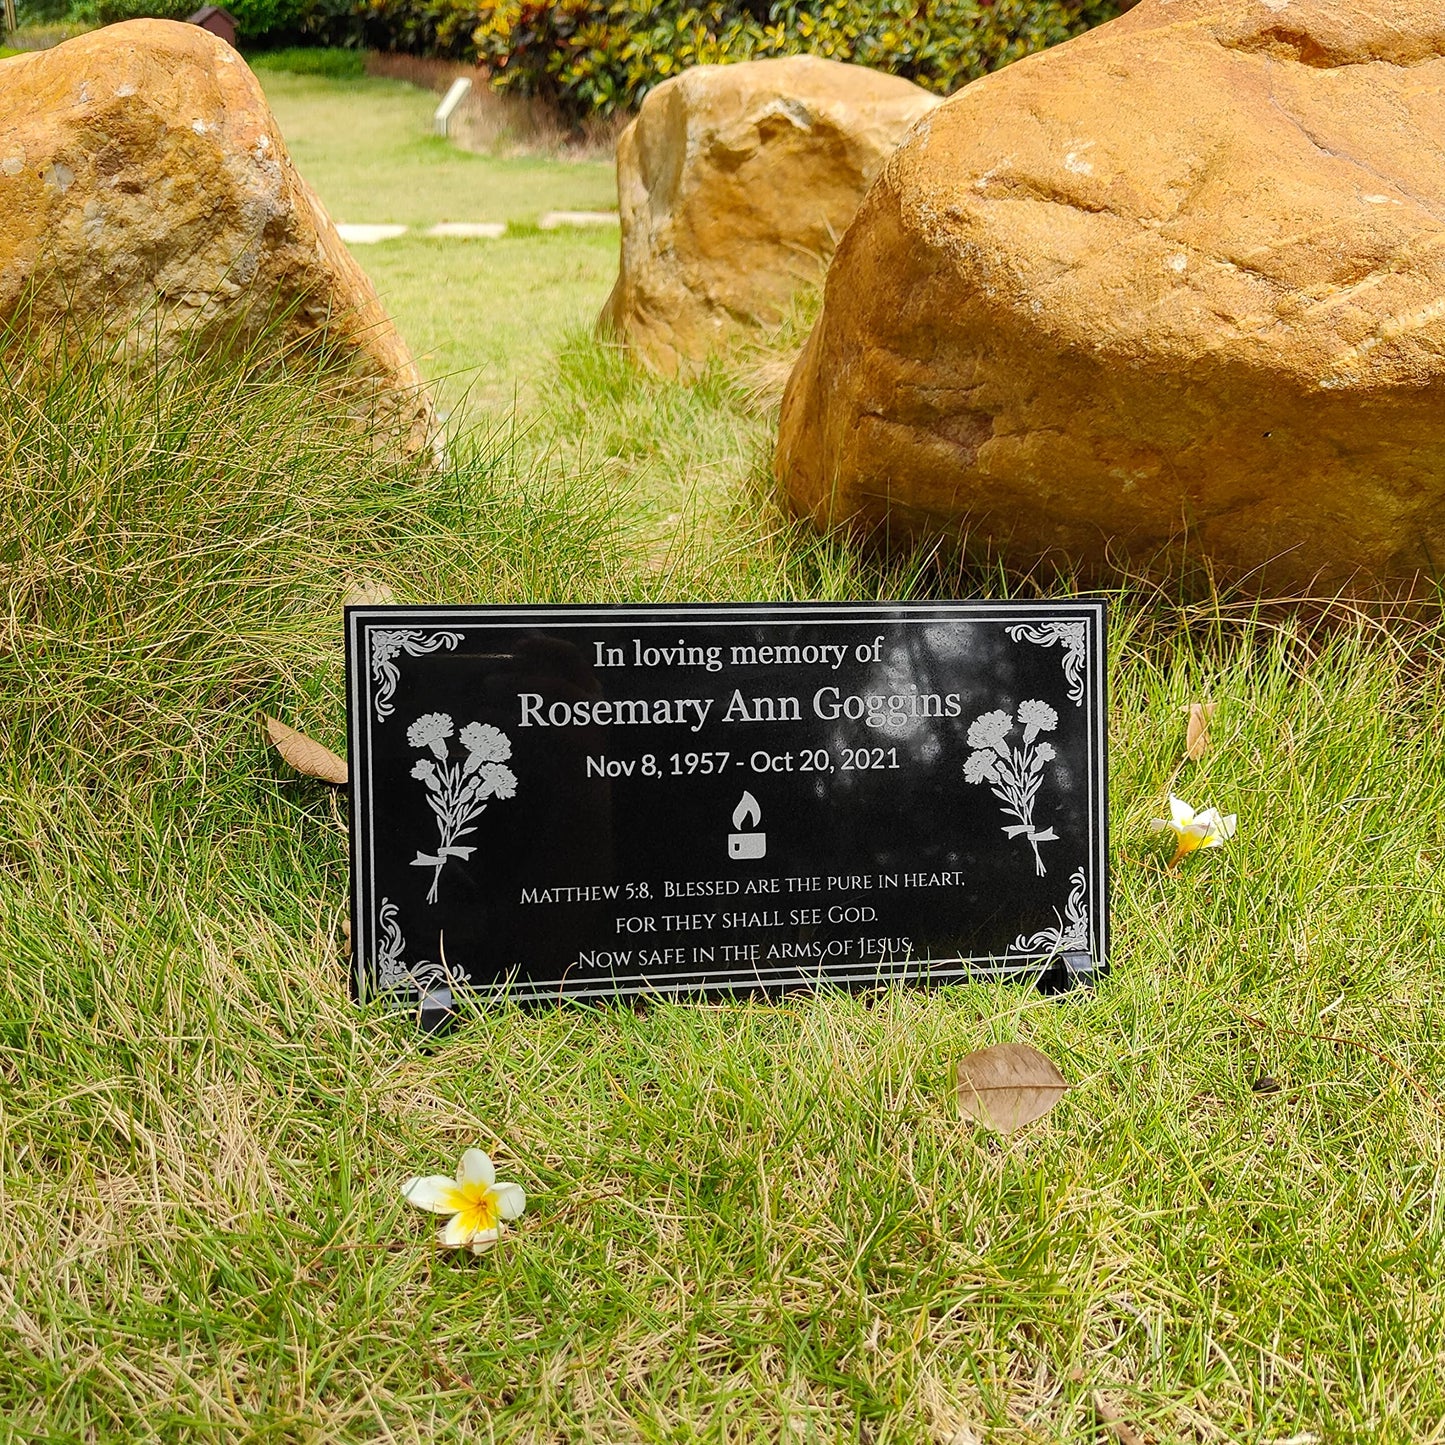 Personalized Human Memorial Stone,Grave Memorial,Headstone for Graves,Grave Decorations for Cemetery,Outdoor Memorial Plaque,Memorial Garden Stones (12inch, Carnation)